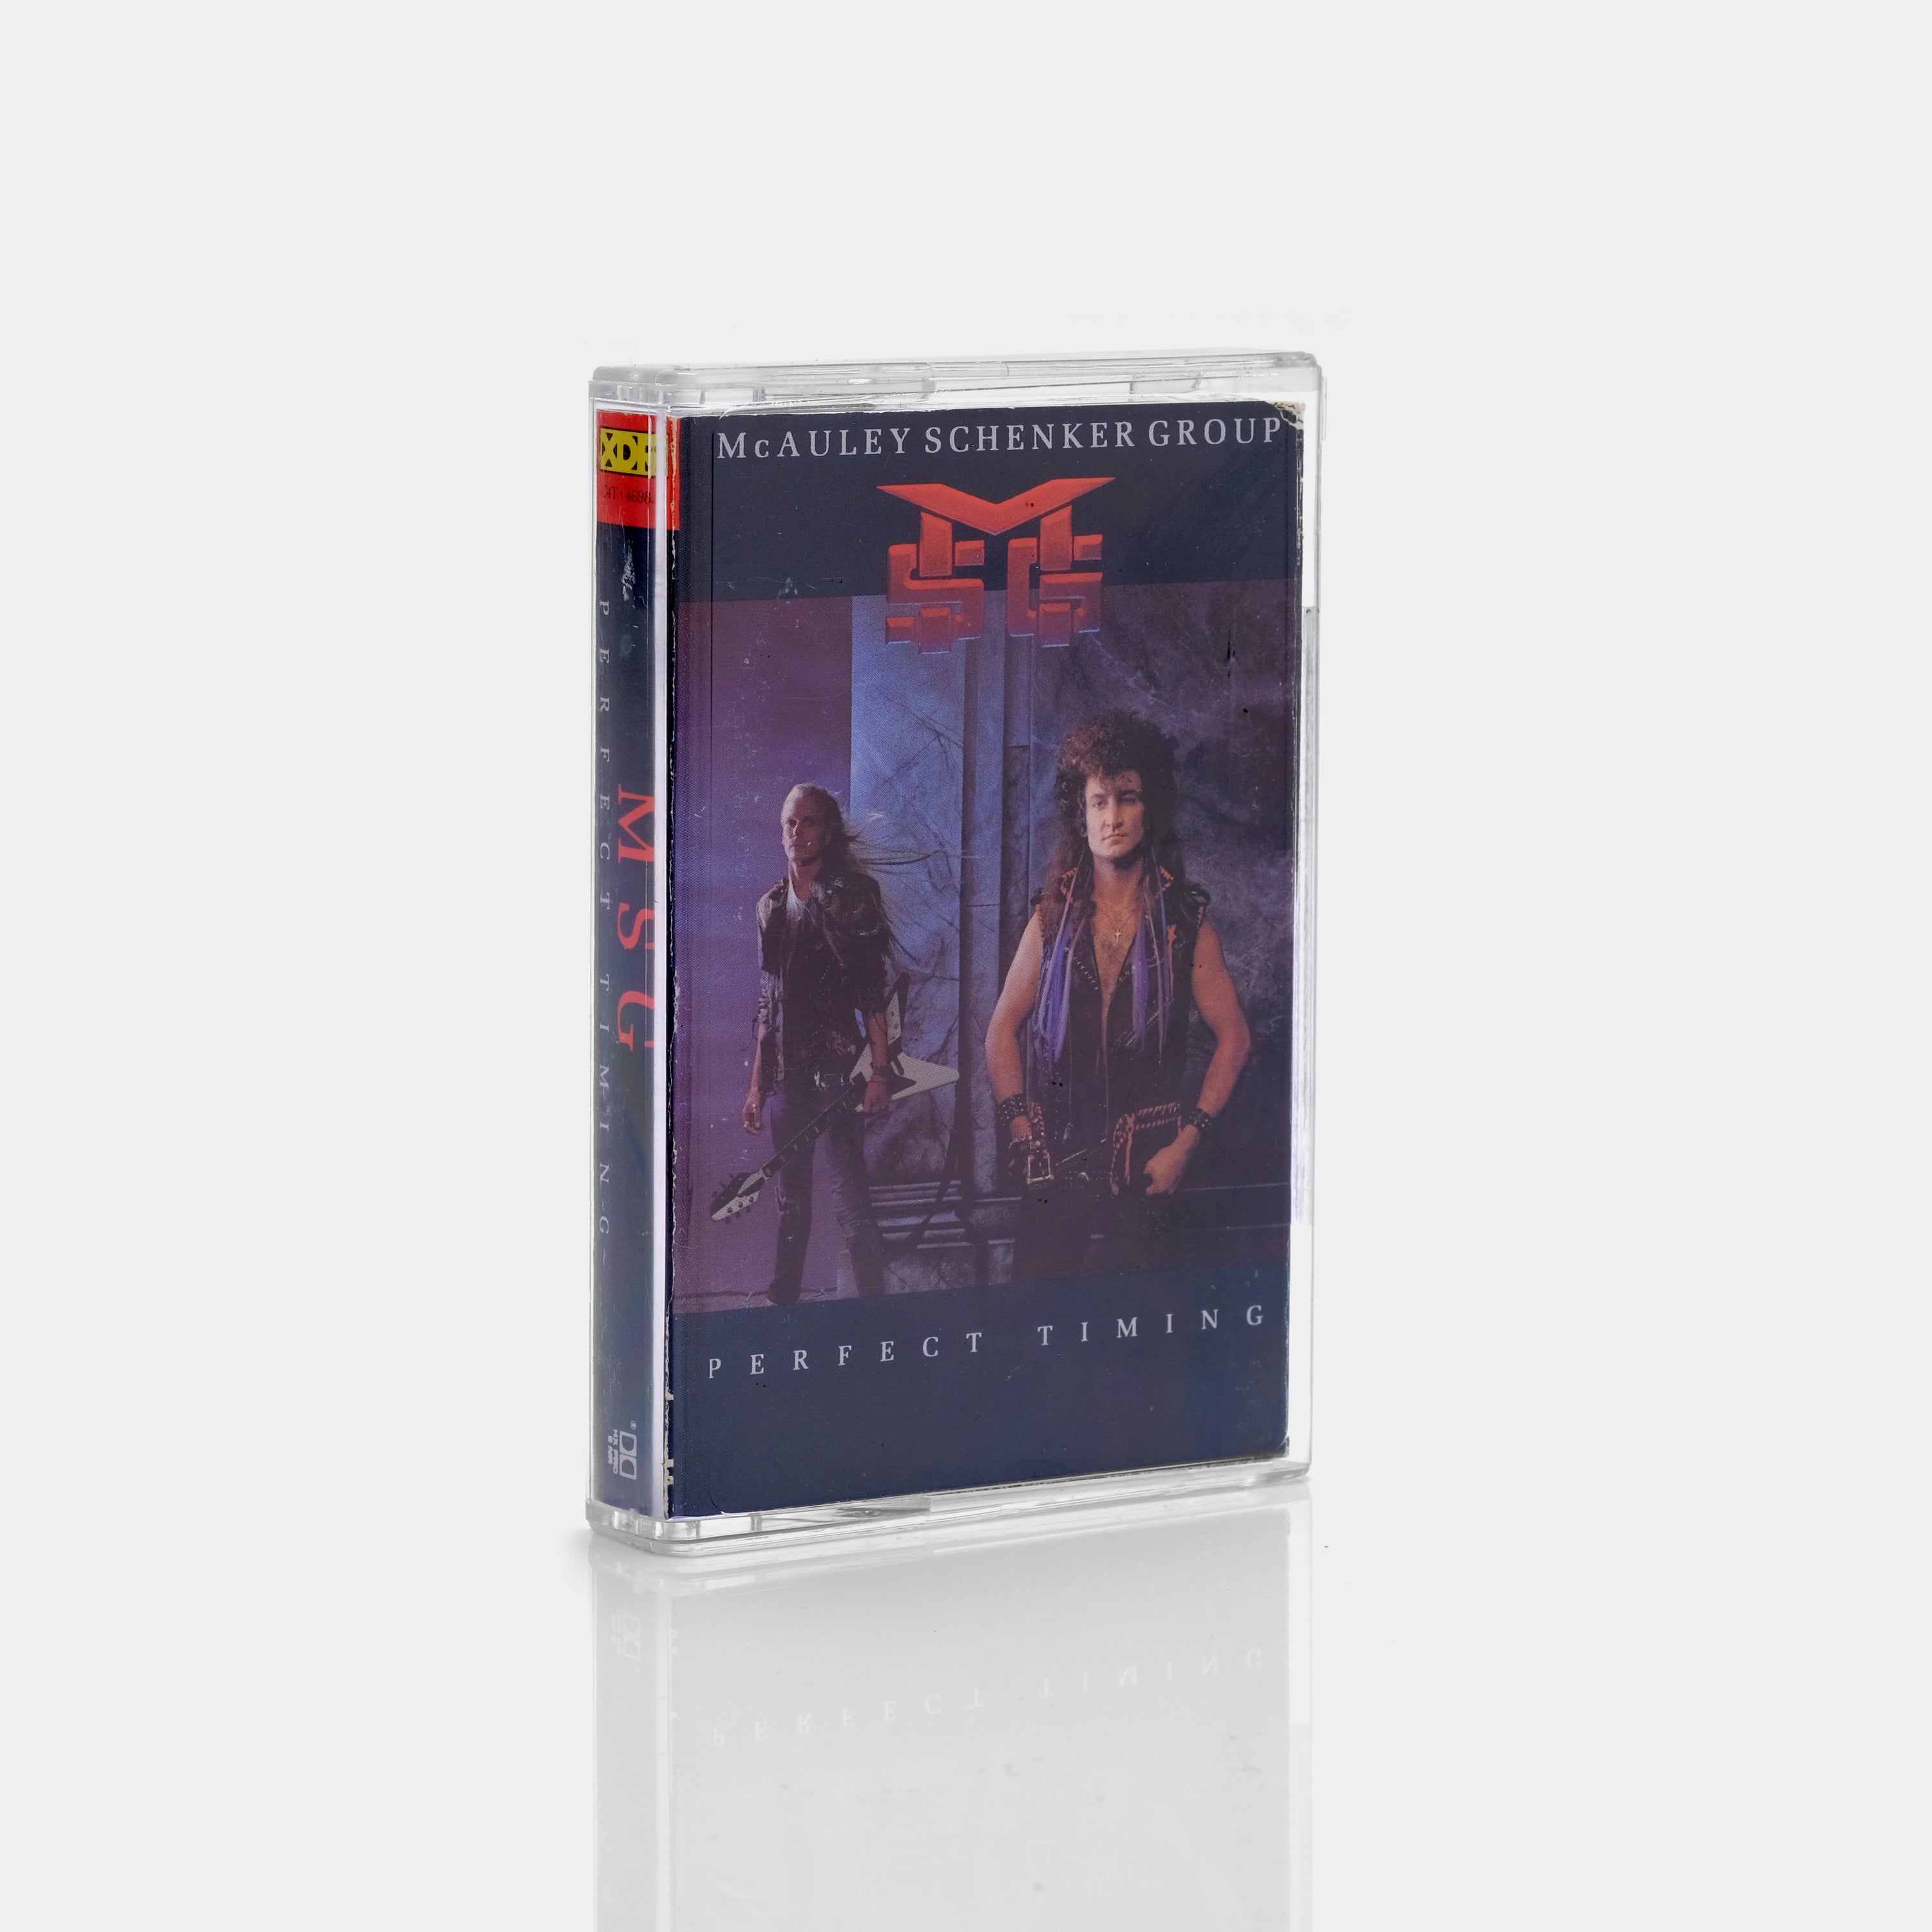 McAuley Schenker Group - Perfect Timing Cassette Tape